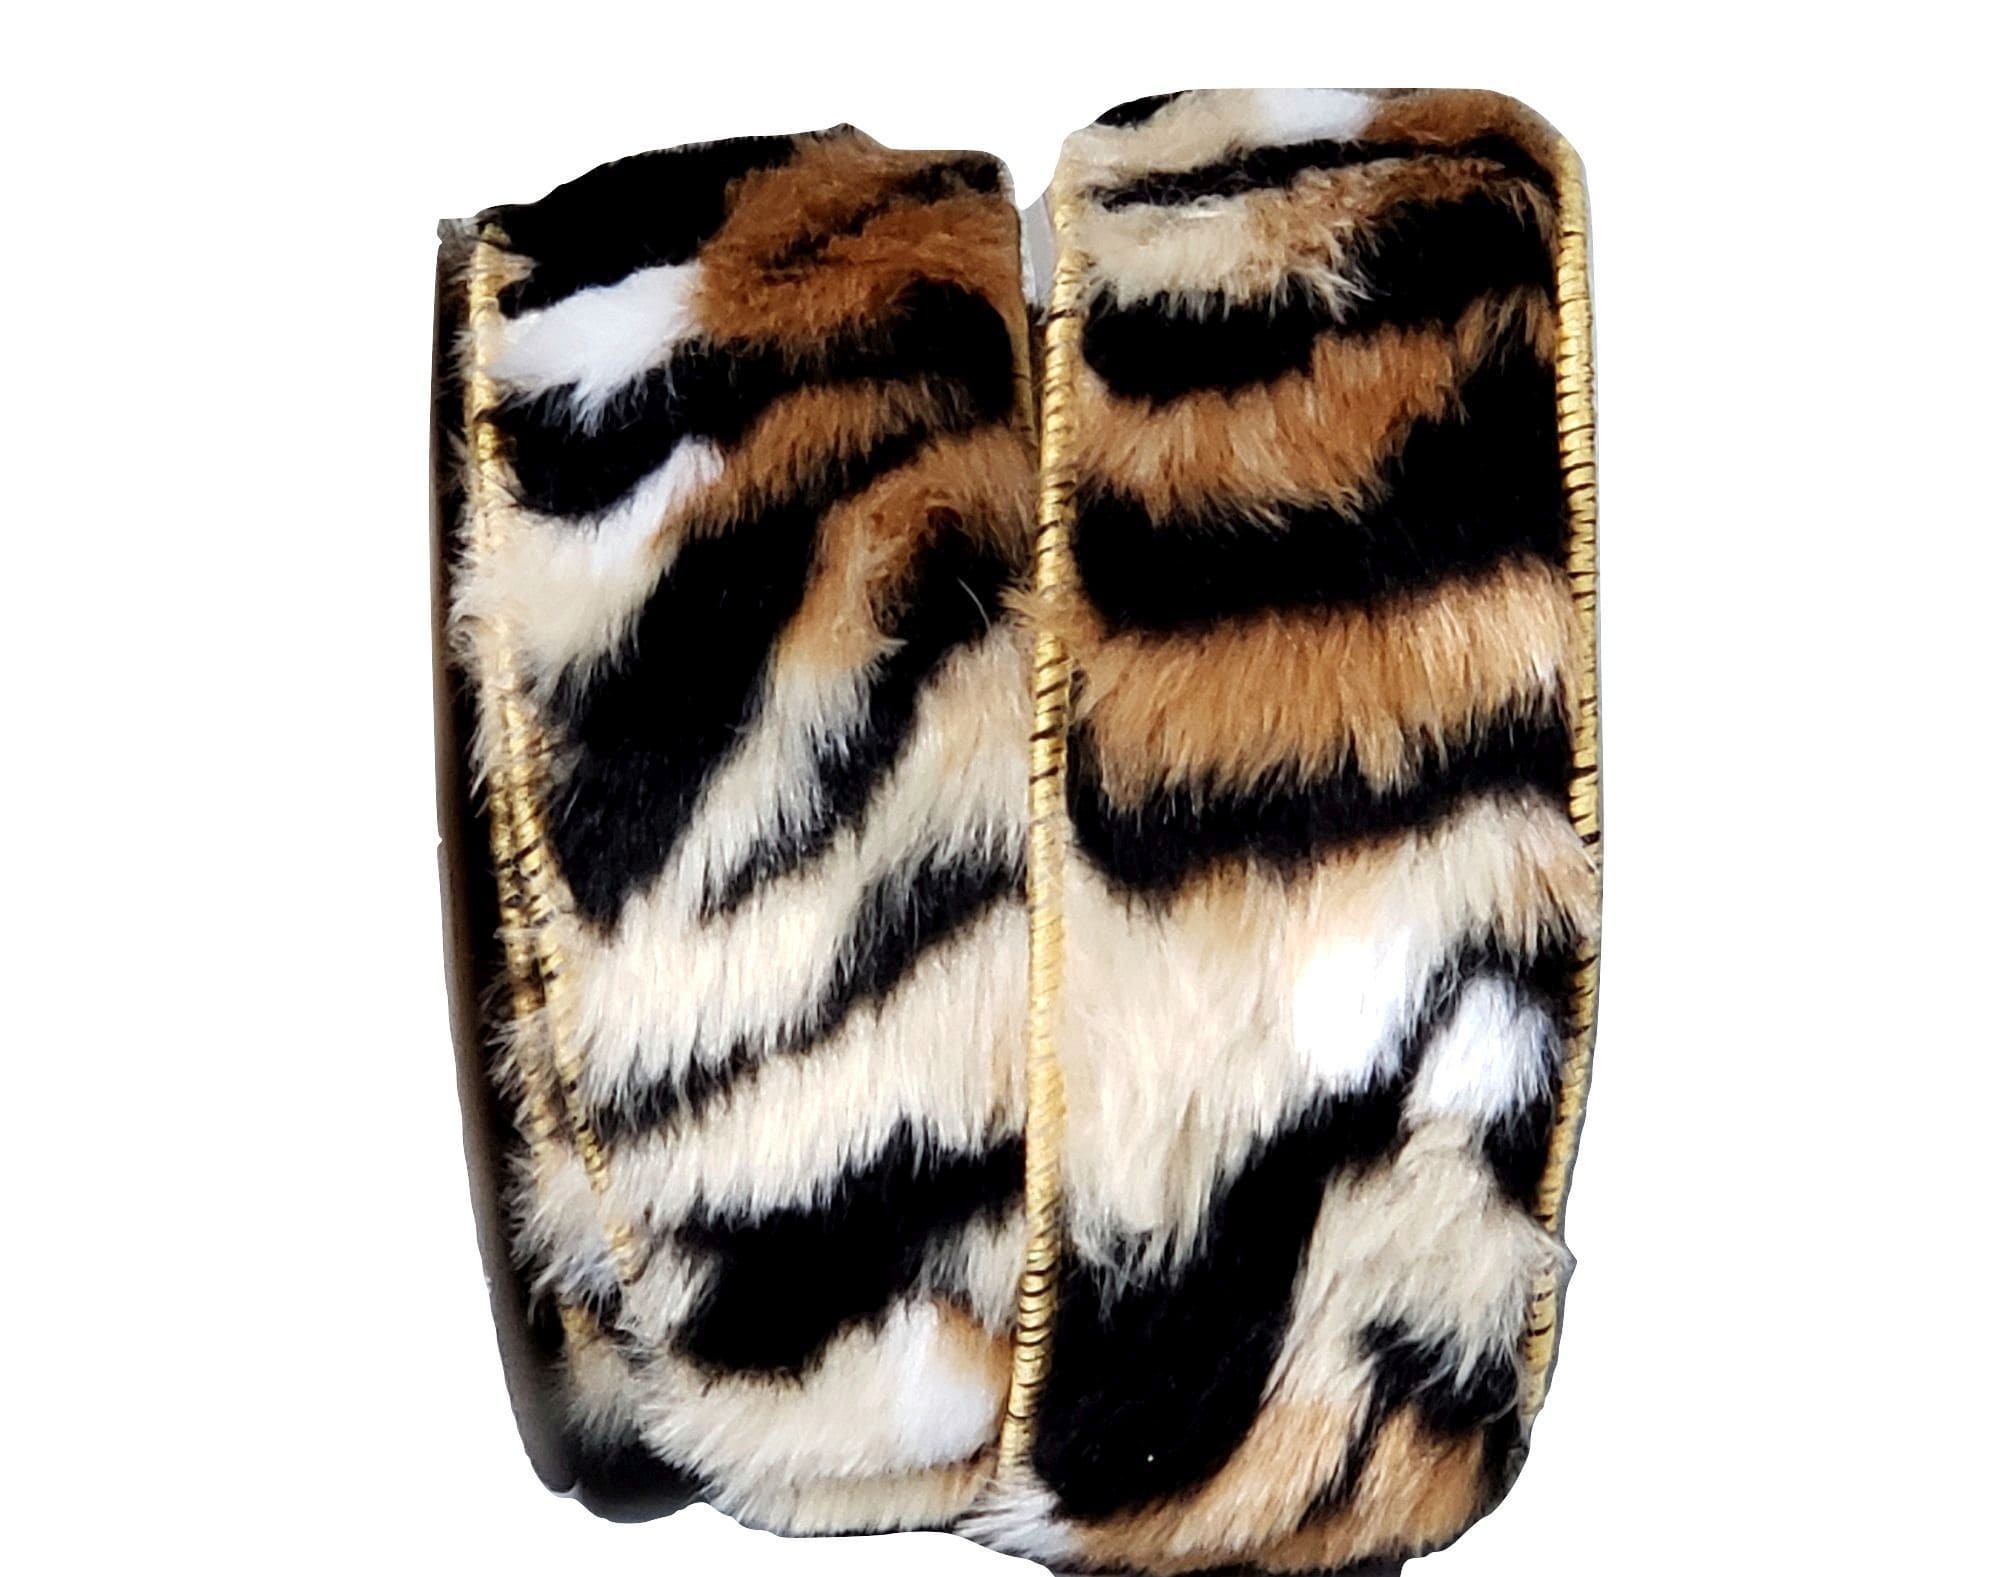 https://www.perpetualribbons.com/cdn/shop/products/perpetualribbons-animals-tiger-2-5-inch-wired-animal-print-faux-fur-ribbon-5-yards-4-different-options-wired-animal-print-faux-fur-ribbon-perpetual-ribbon-31949561495701_1024x1024@2x.jpg?v=1630008742